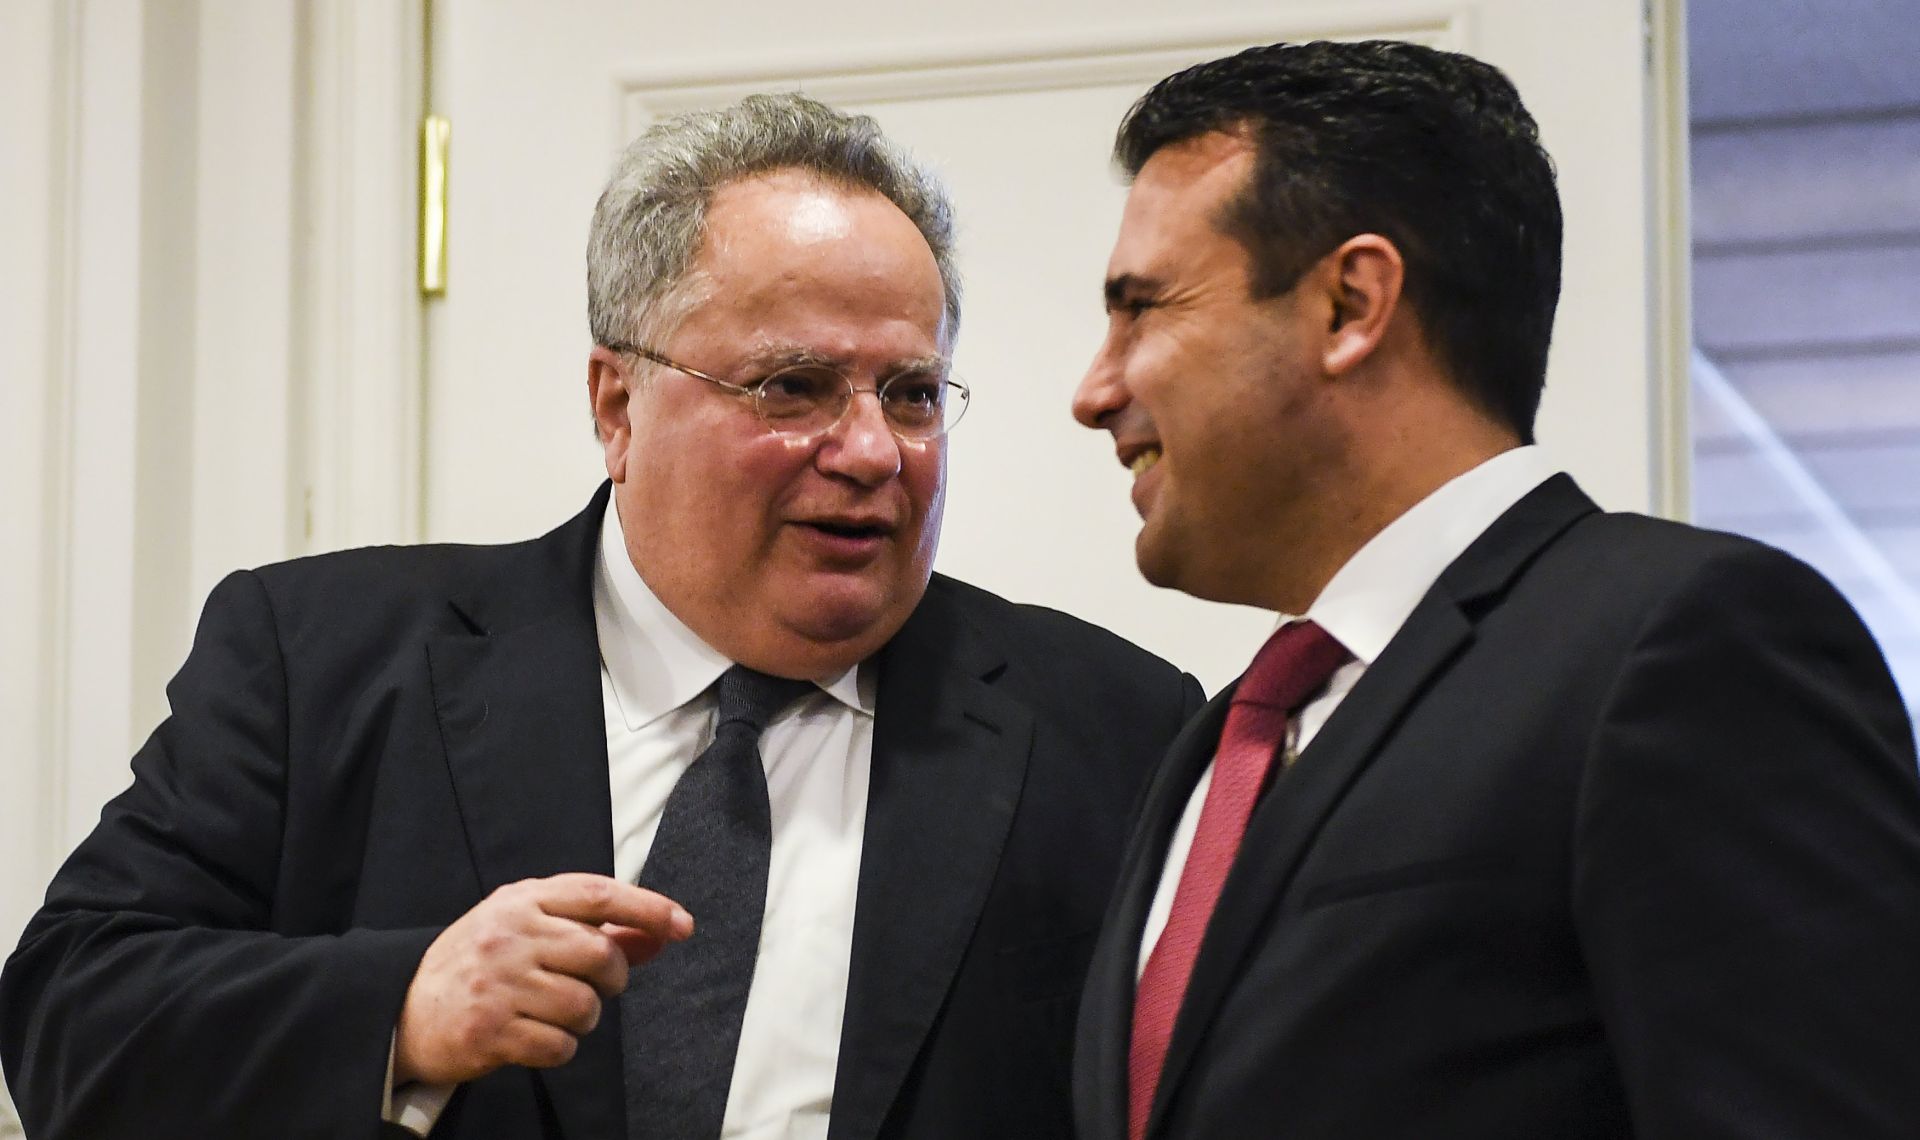 epa06623370 Greek Foreign Minister Nikos Kotzias (L) chats with Macedonian Prime Minister Zoran Zaev (R) after their meeting in Skopje, the Former Yugoslav Republic of Macedonia (FYROM), 23 March 2018. Nikos Kotzias arrived for a two-day official visit to Skopje with a proposal to resolve a long-standing name issue between two neighbouring countries.  EPA/GEORGI LICOVSKI